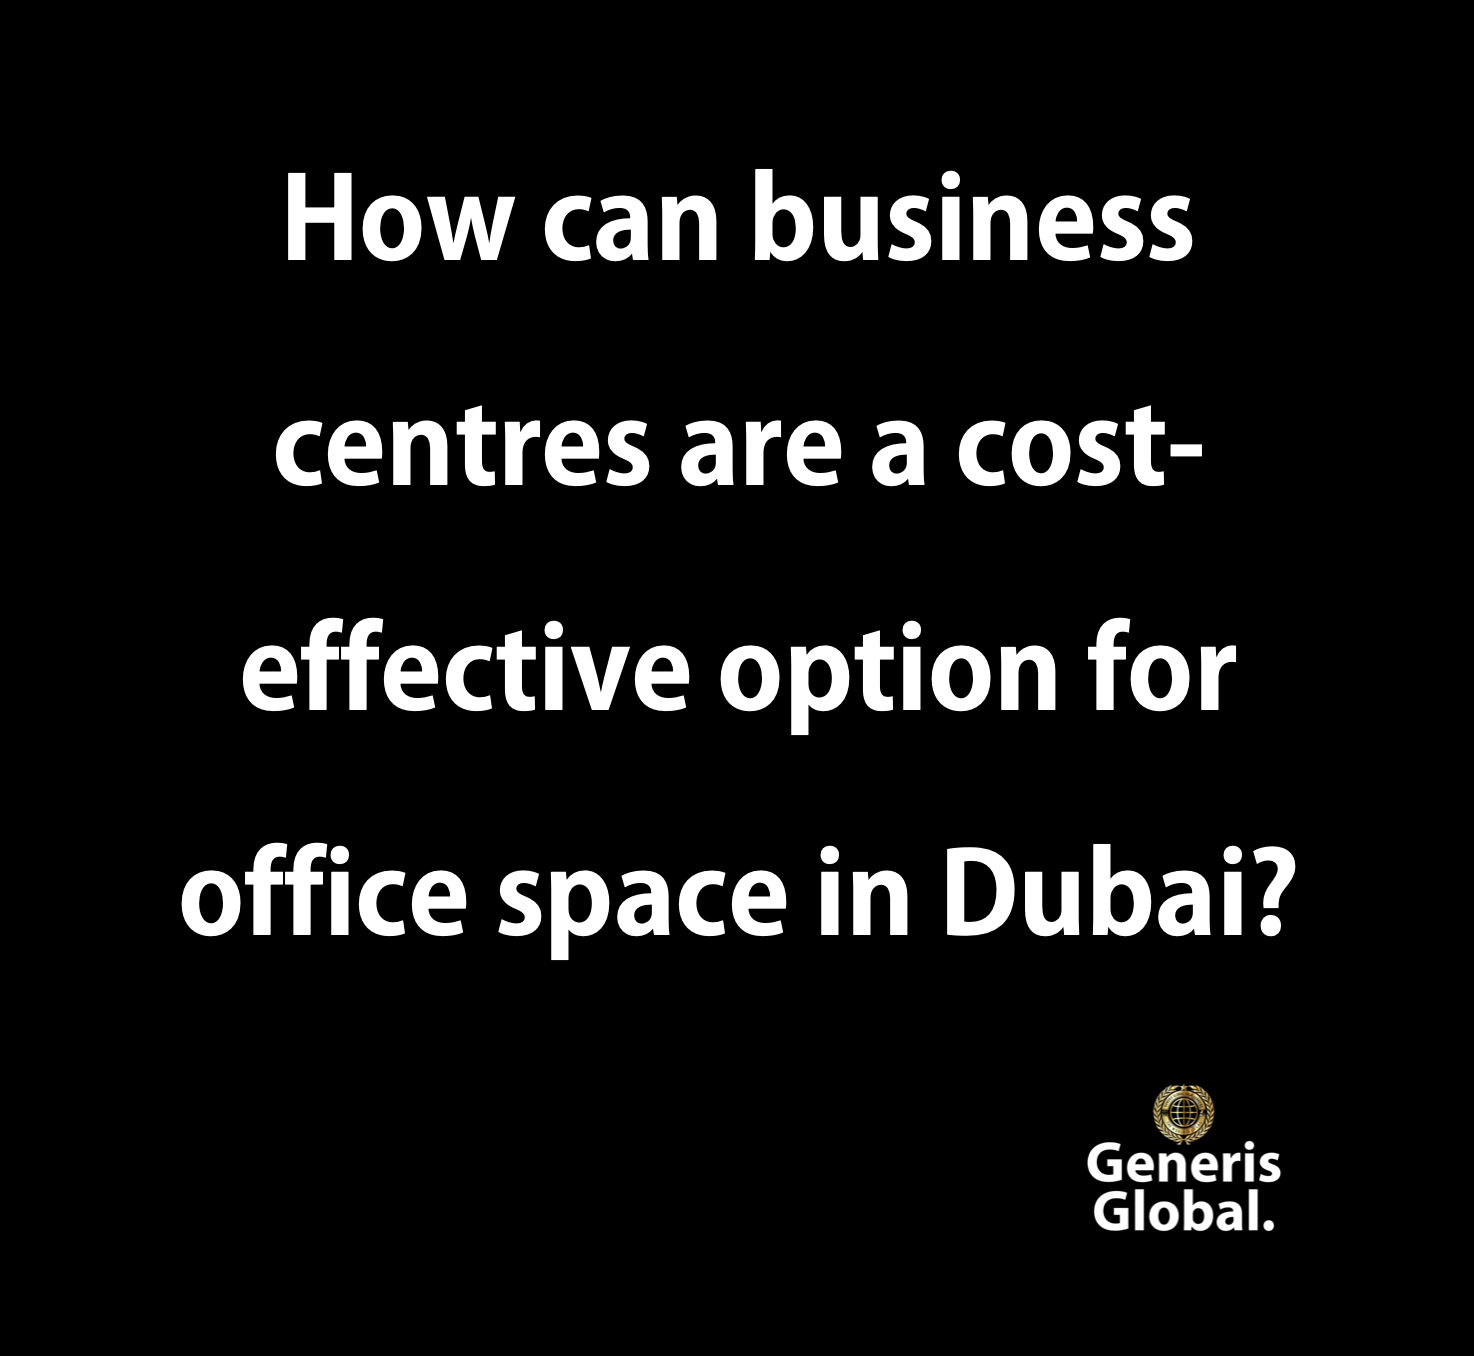 How can business centres are a cost-effective option for office space in Dubai?